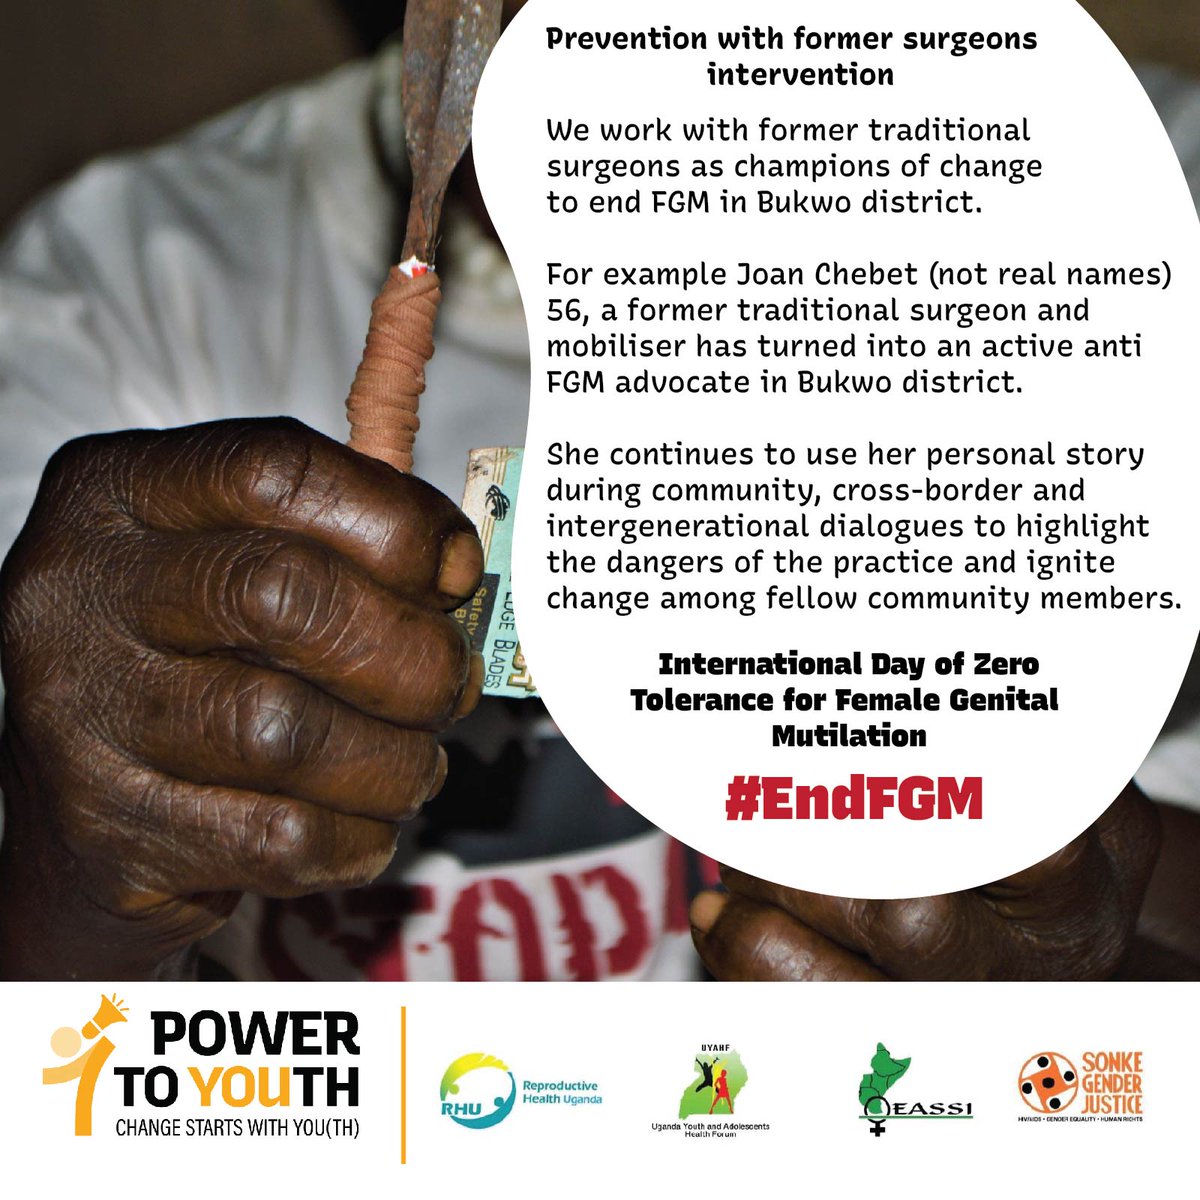 Educate communities on the human rights of women and girls, the health risks associated with female genital mutilation (FGM), and the importance of breaking the cycle for future generations.
#HerVoiceMatters #EndFGM